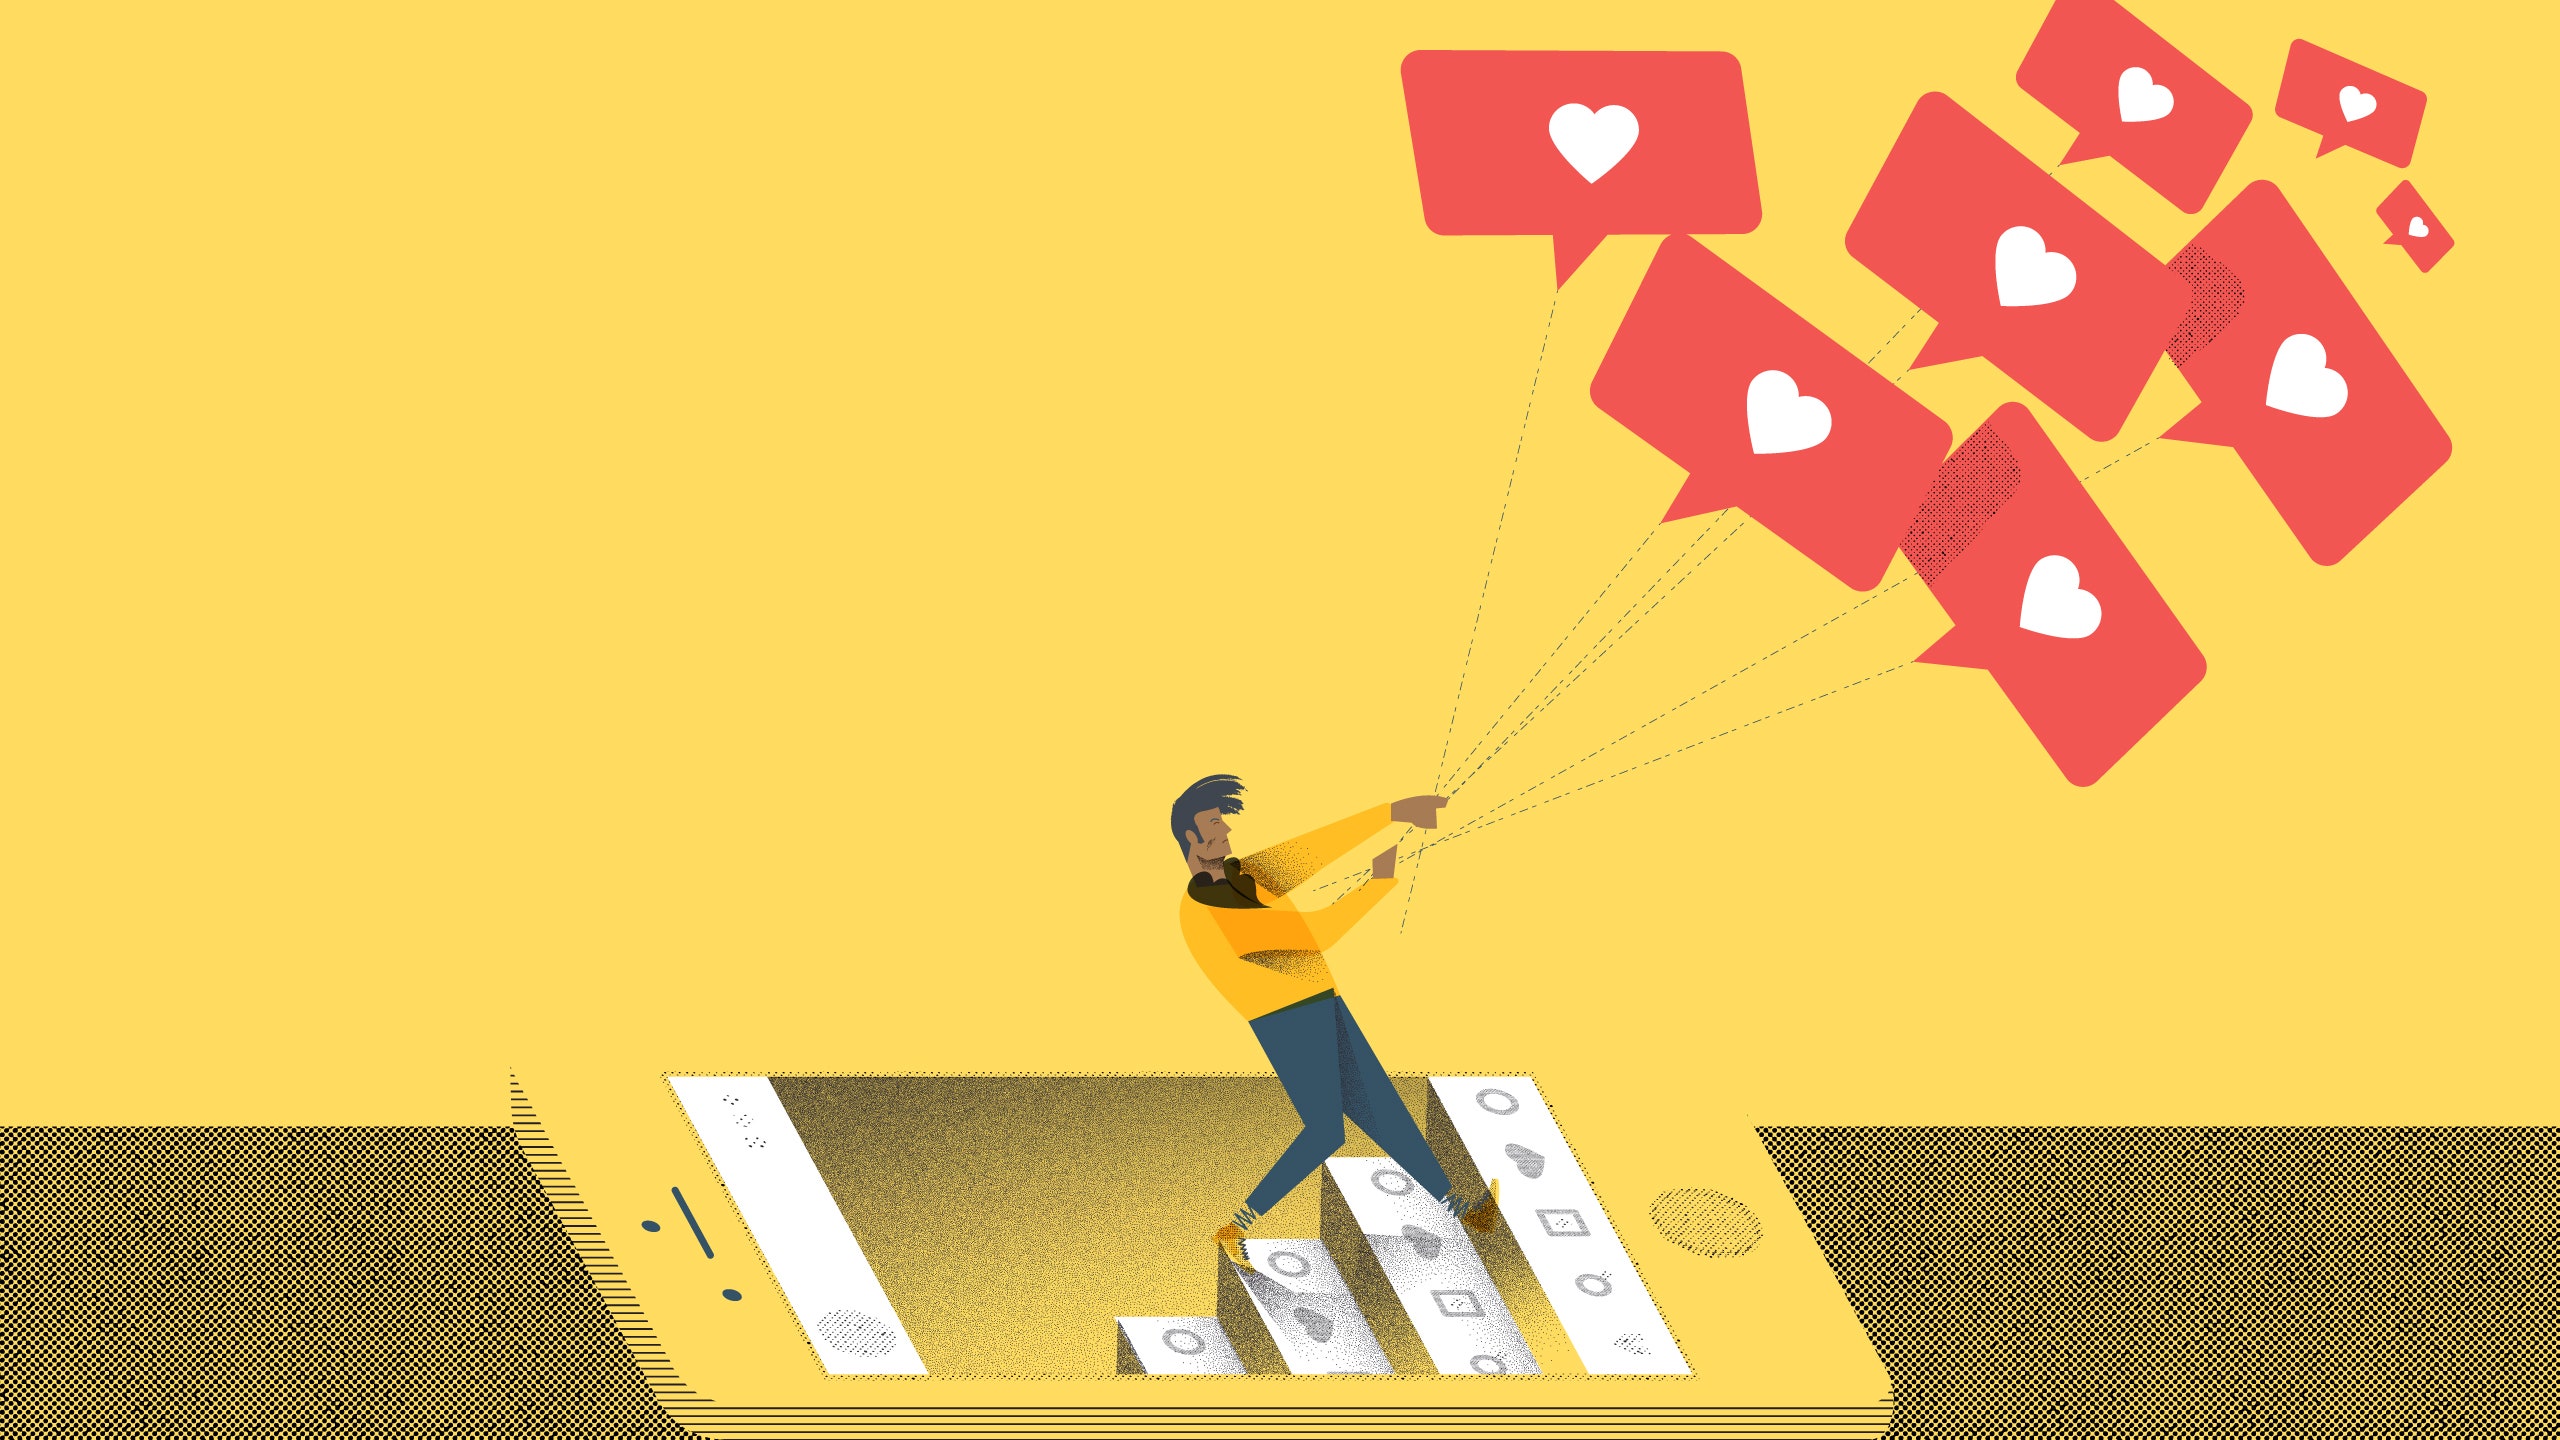 How to increase your followers on Instagram